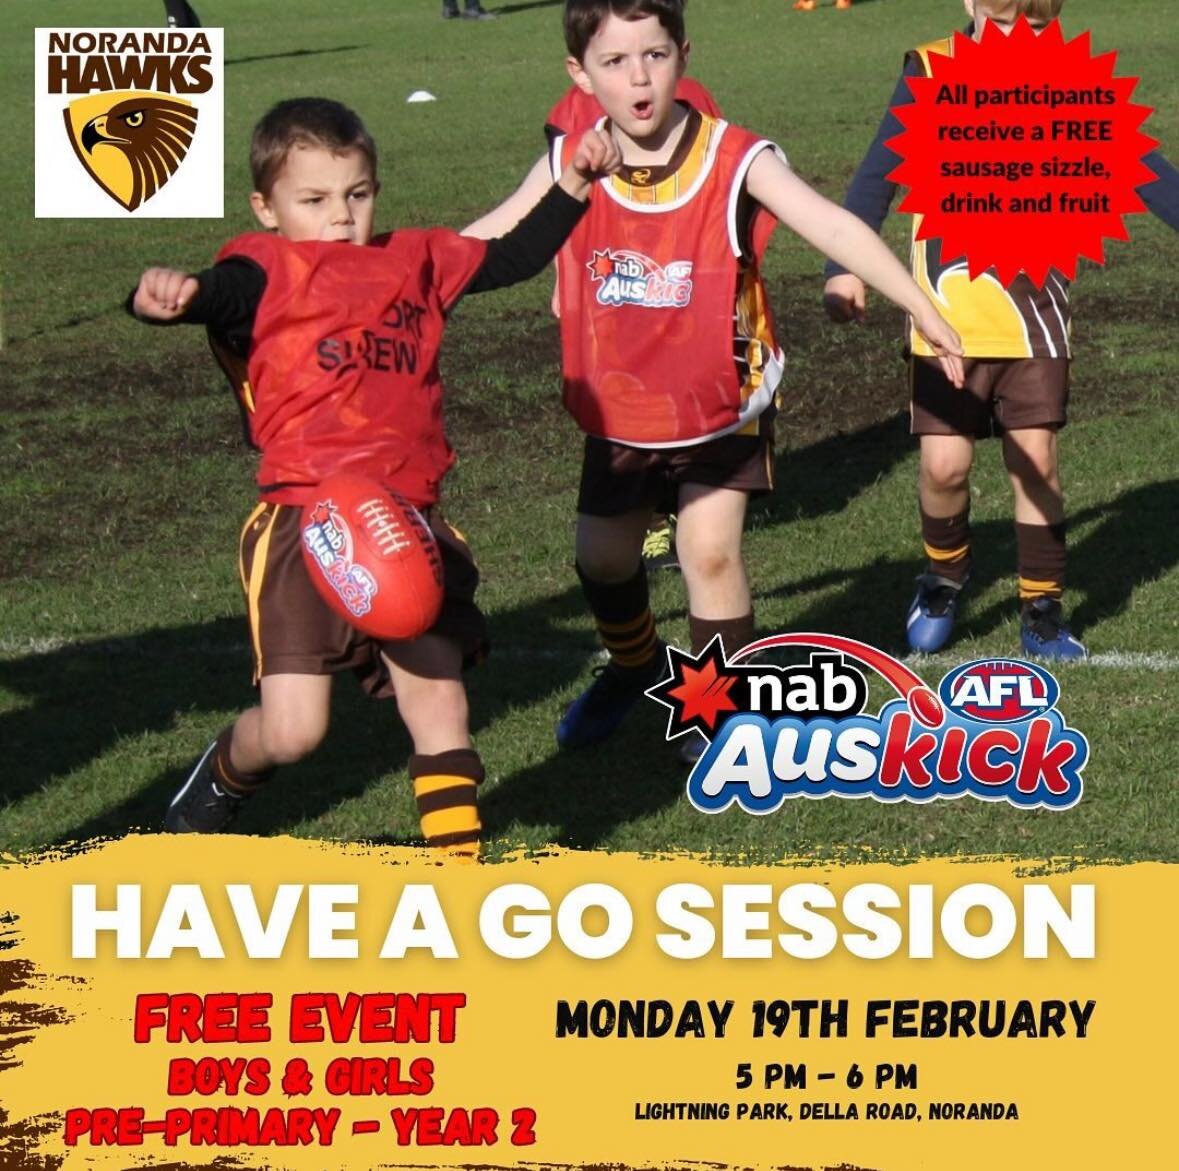 🏉 FREE AUSKICK &lsquo;HAVE a GO&rsquo; session 🏉
Does your child (Pre-Primary - Year 2) want to play football? 

Why don't you bring them down to have a go and join in the fun, bring your mates too!

🗓️ Monday 19th February
⏰ 5:00-6:00 pm
📍 Light